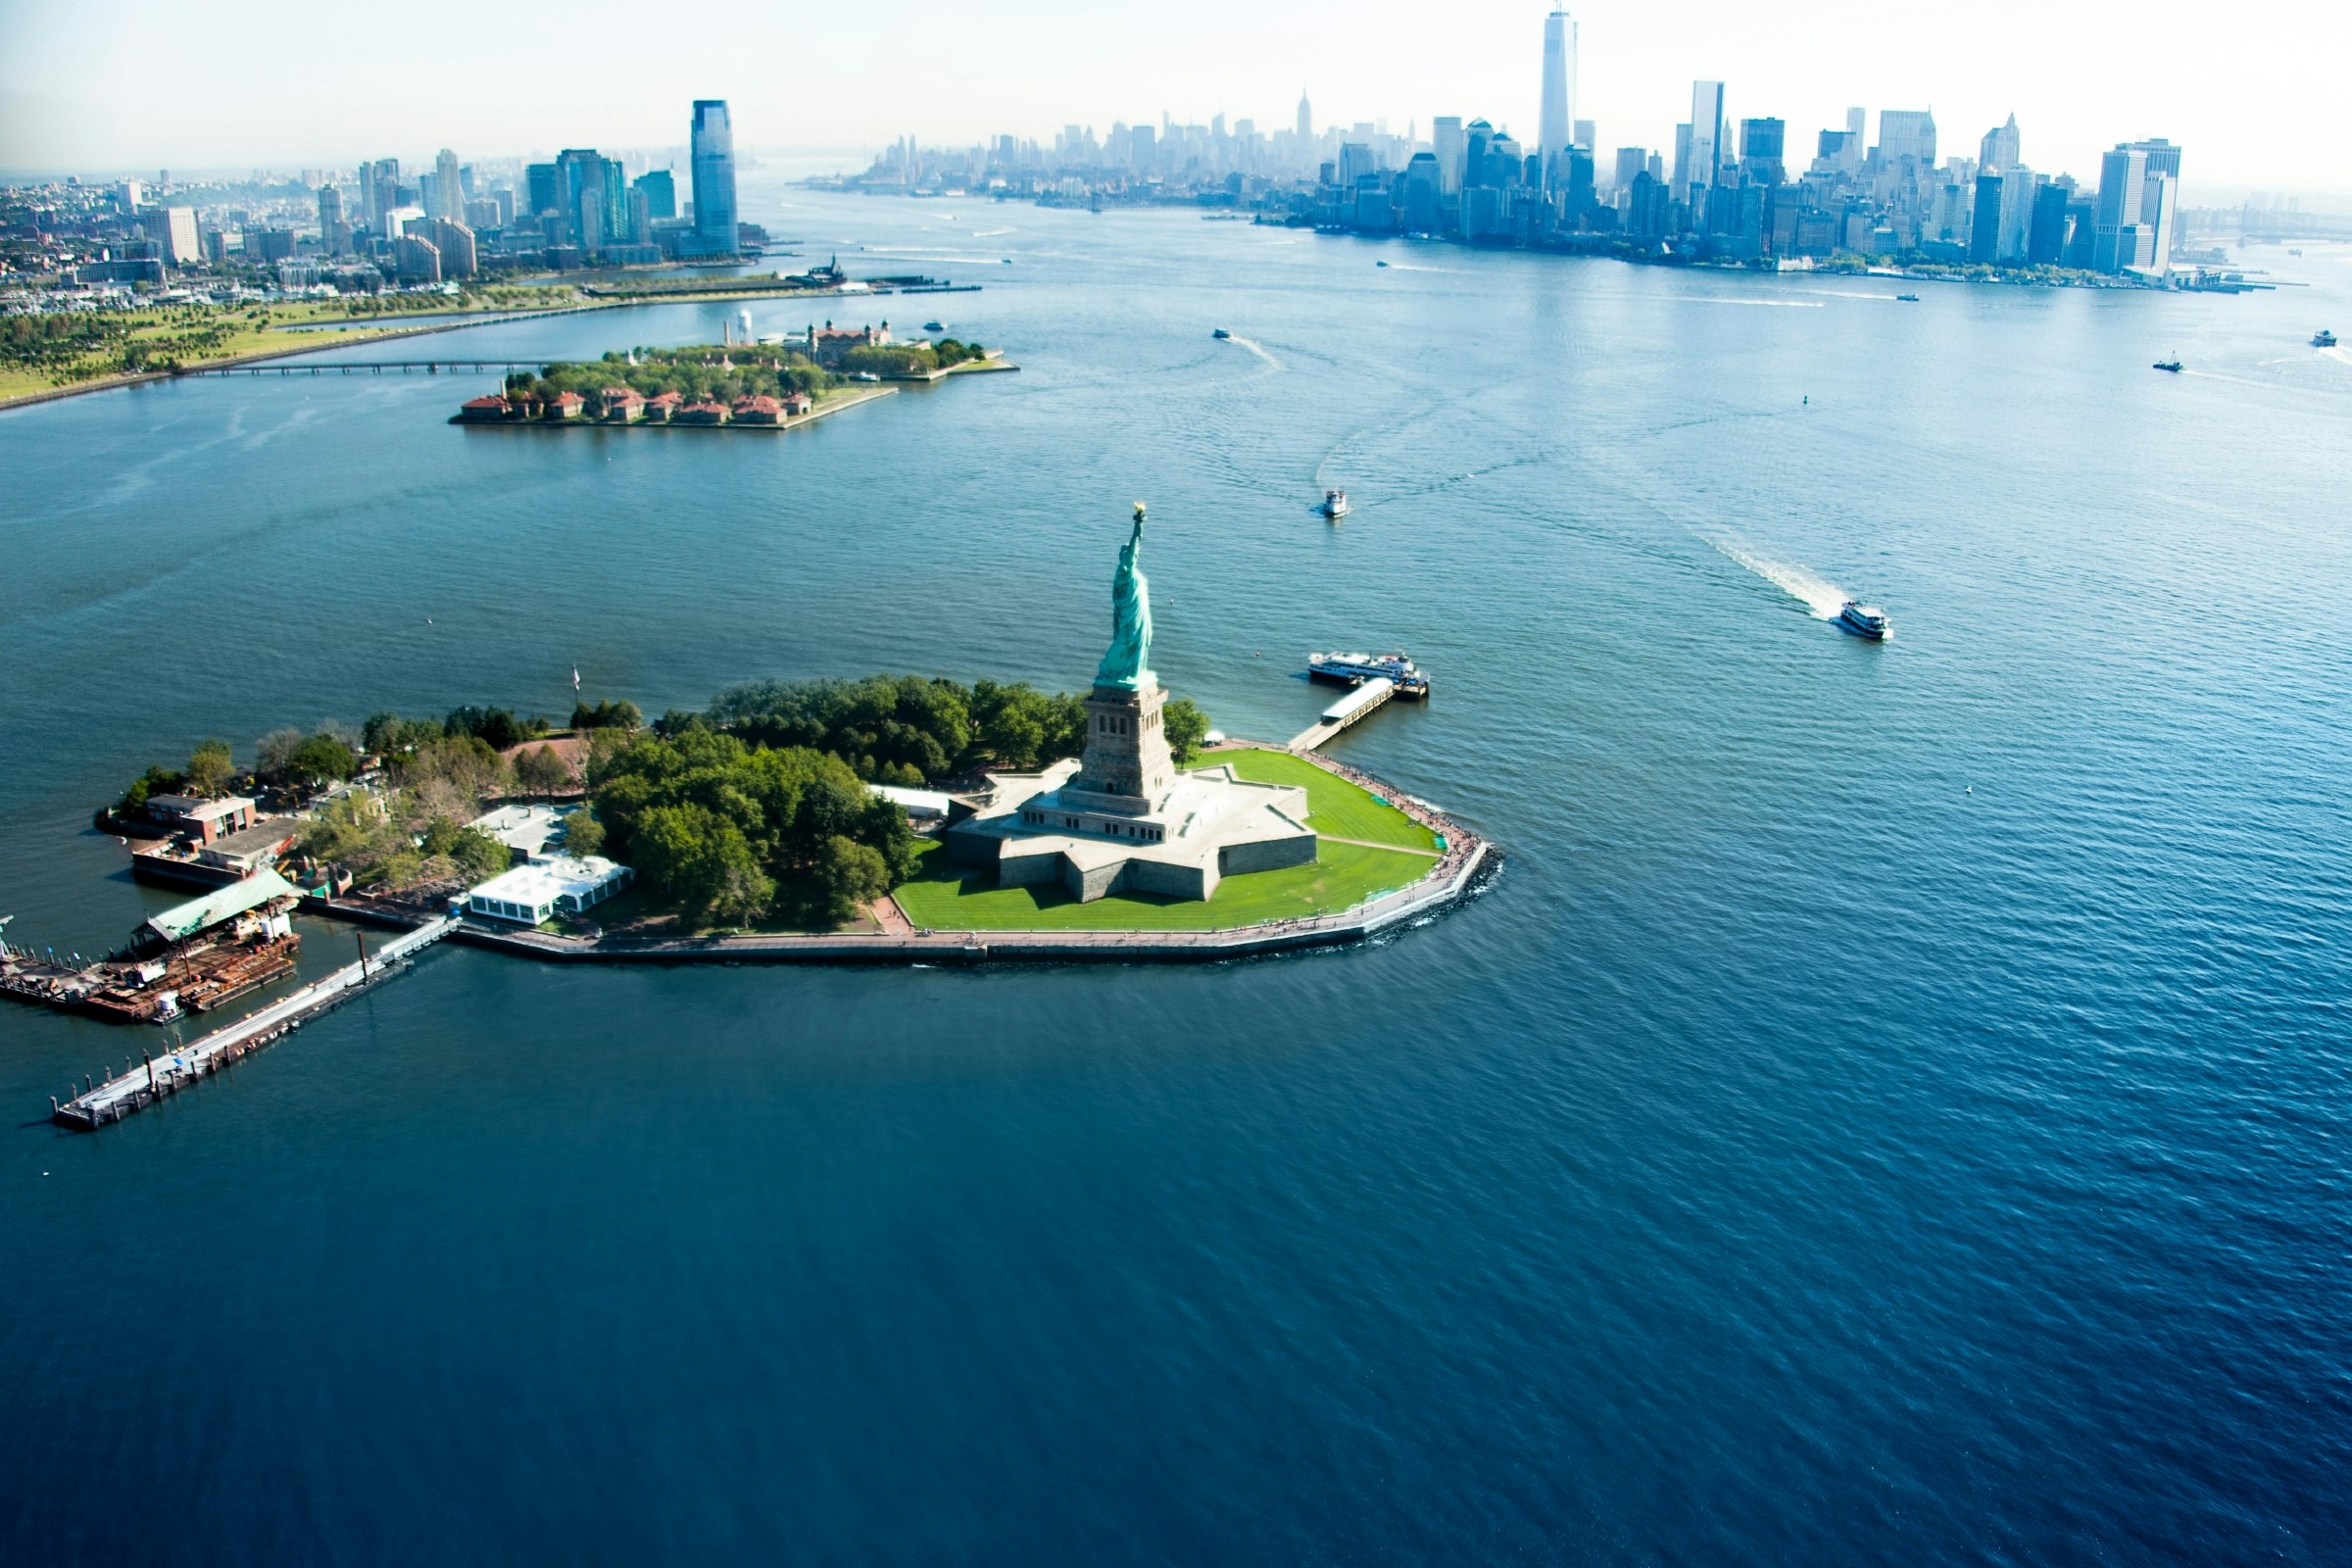 An aerial view of a statue on an island with a city skyline behind